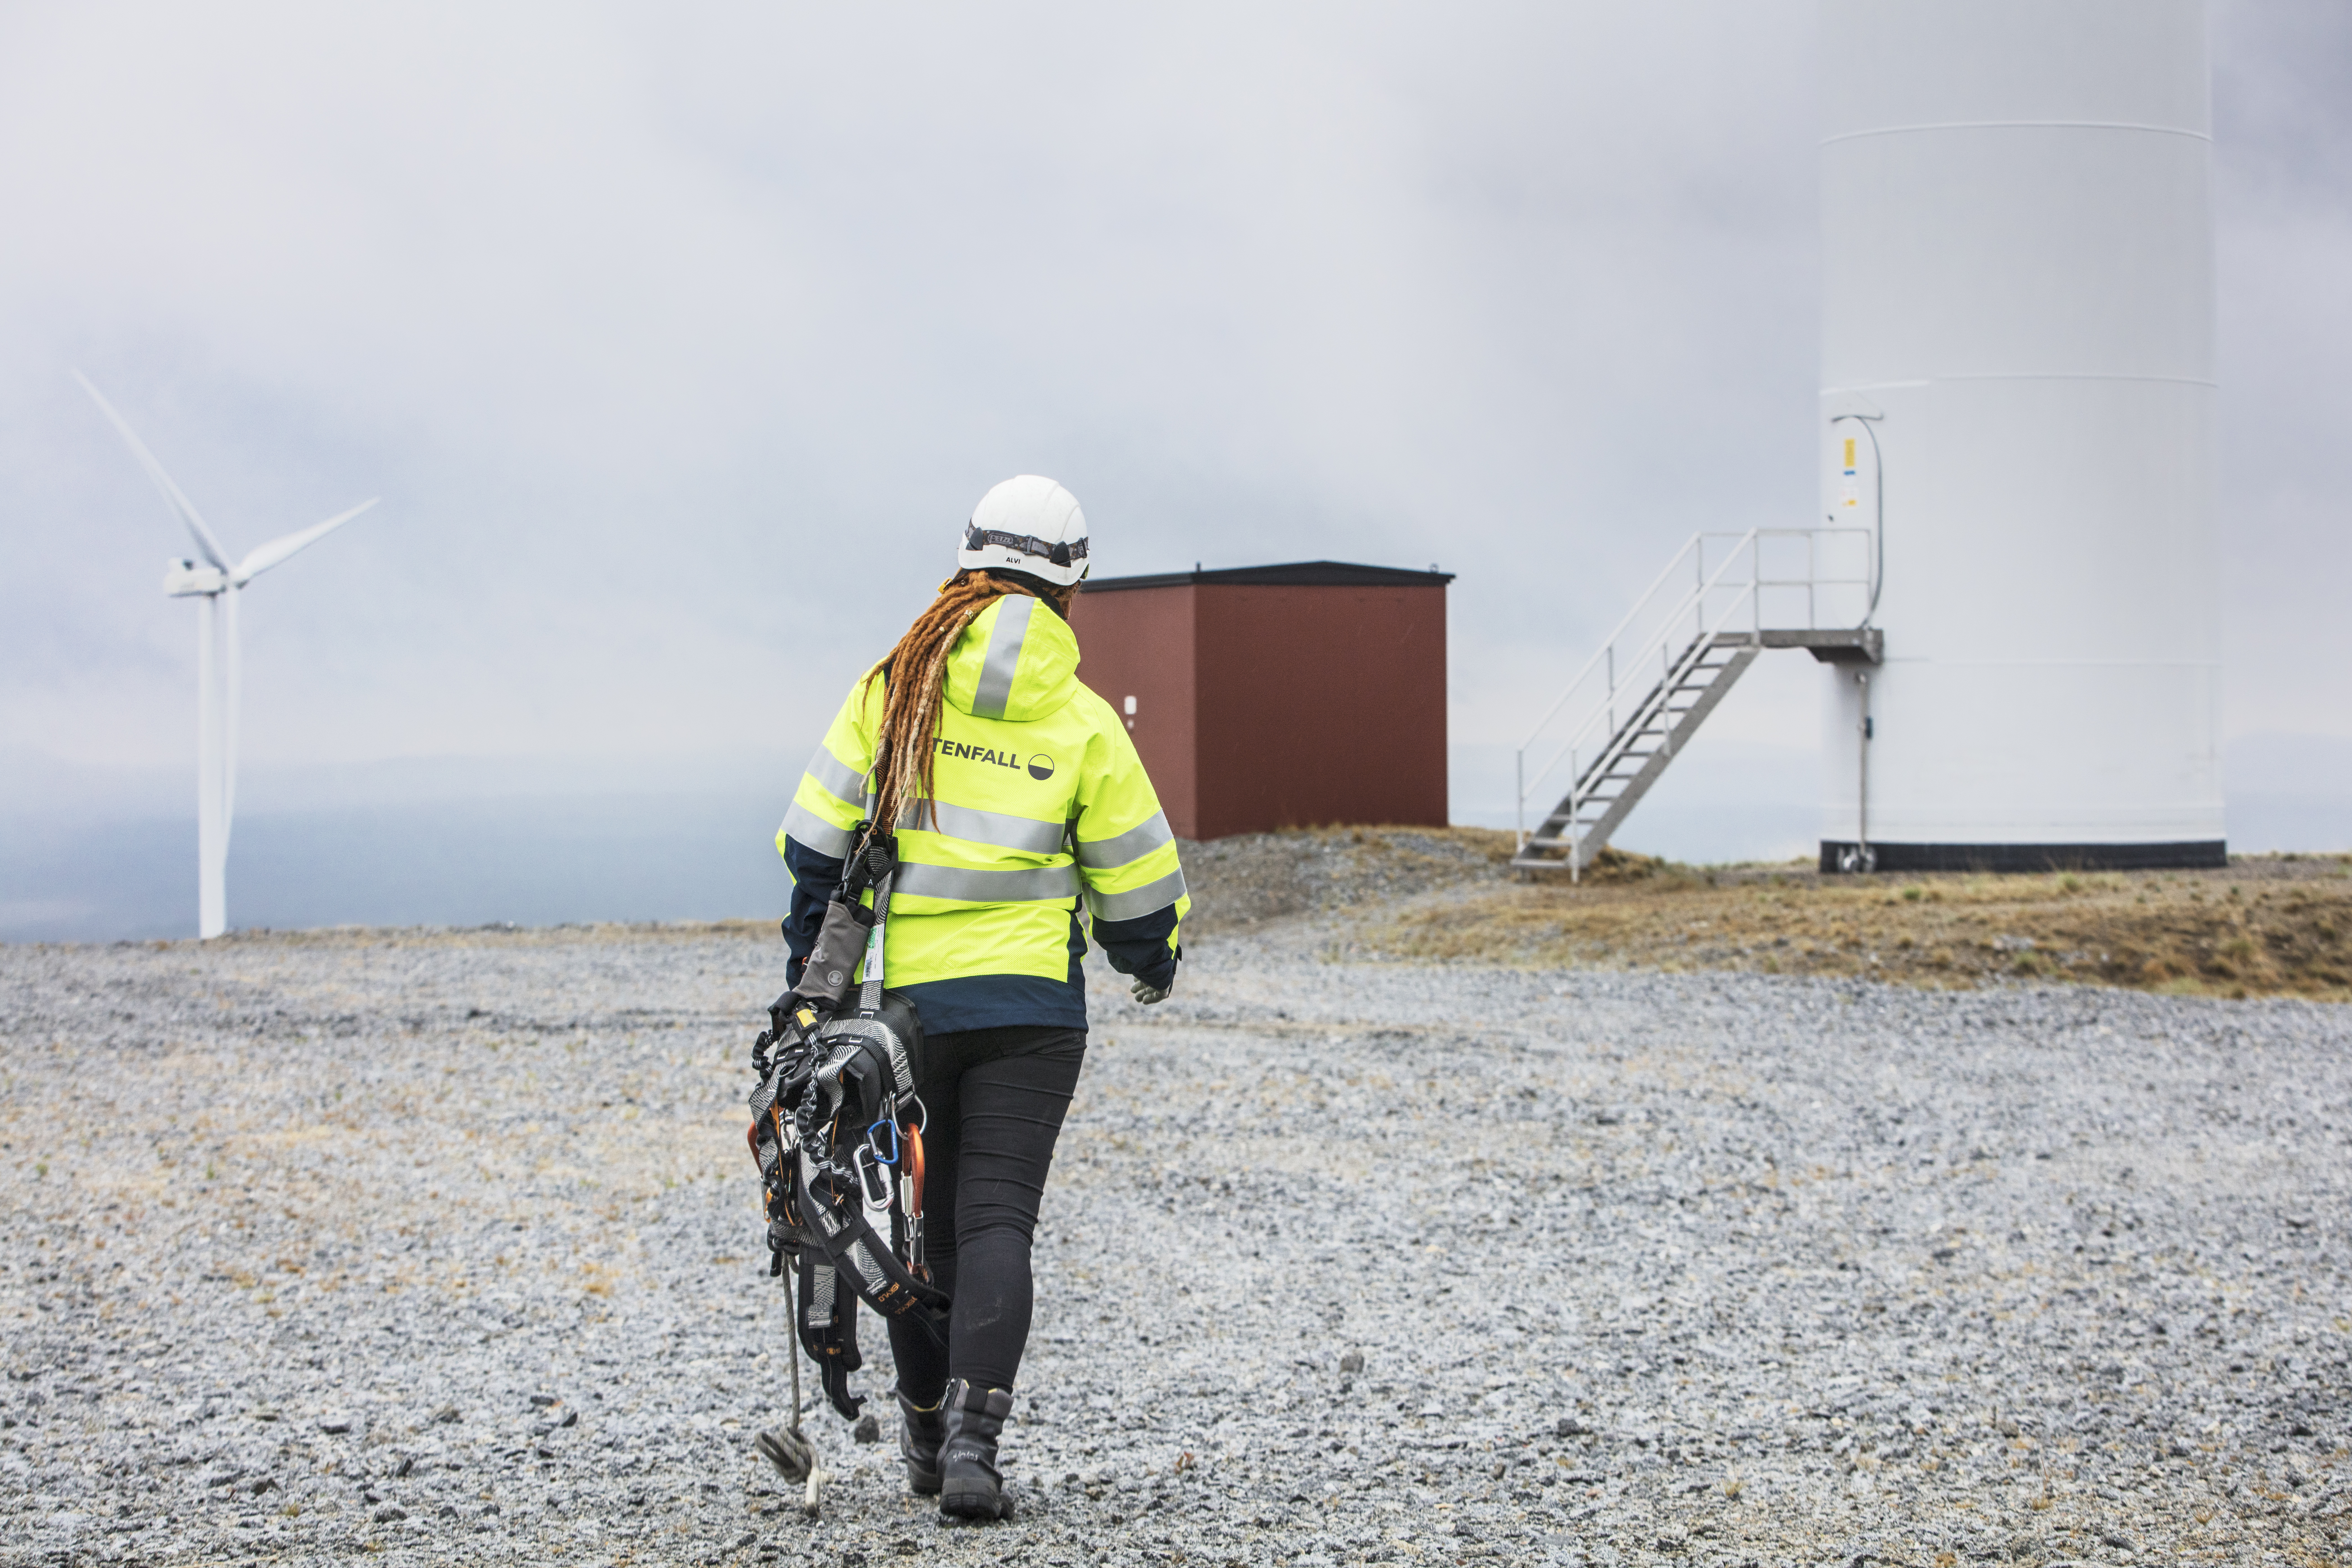 Image of a Vattenfall employee wearing safety clothes and helmet, walking across dry ground towards a wind turbine.